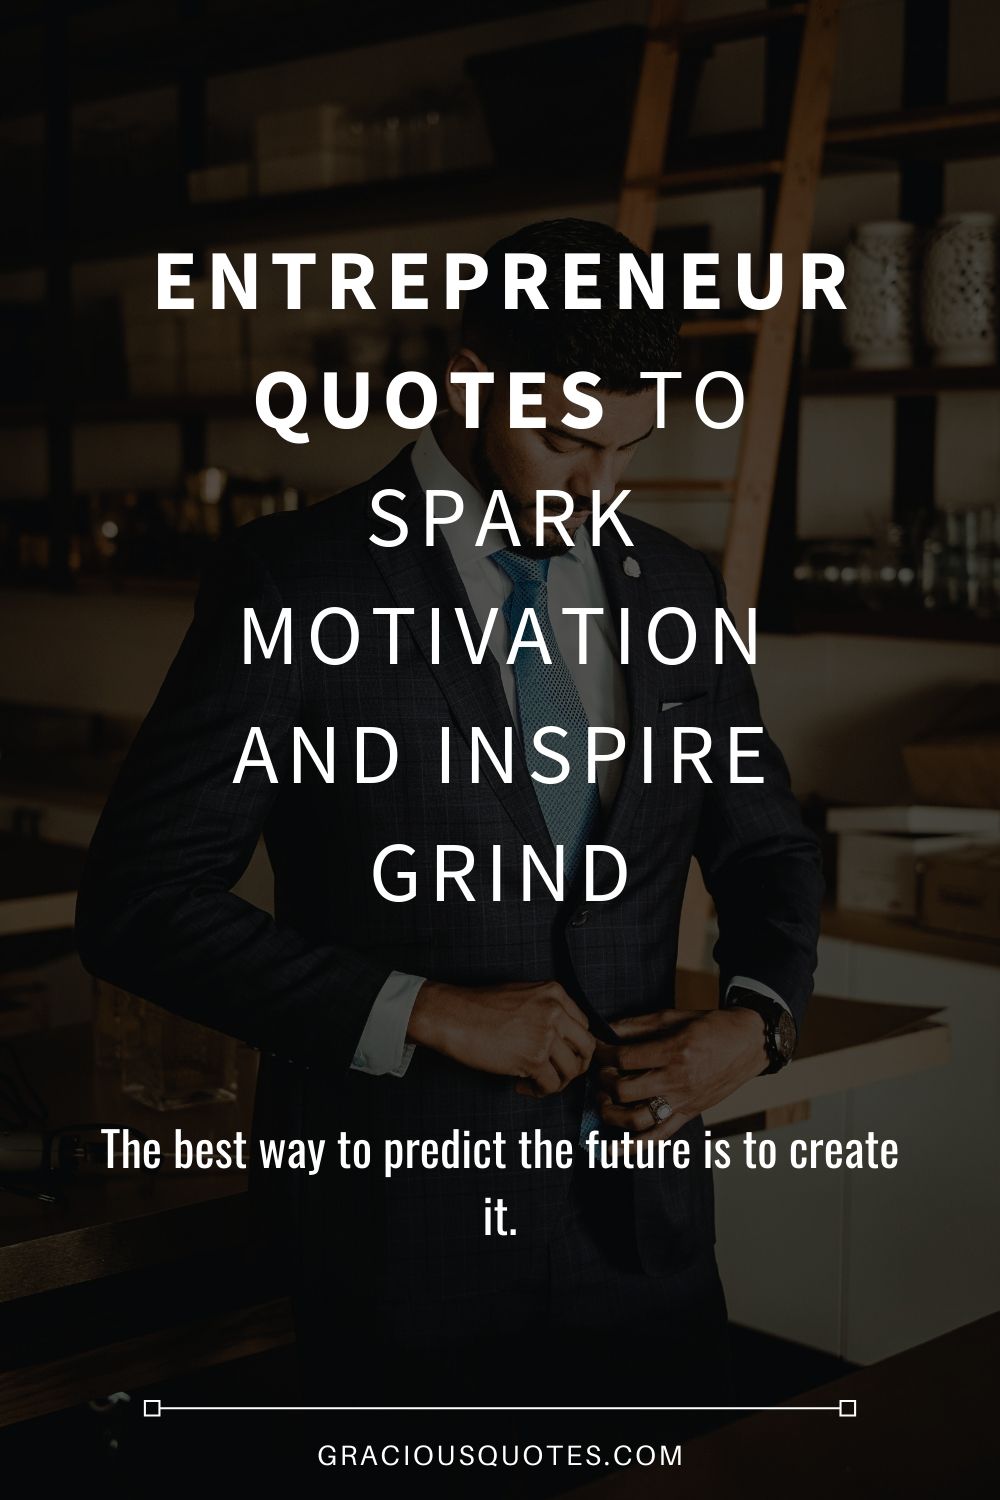 Entrepreneur-Quotes-to-Spark-Motivation-and-Inspire-Grind-Gracious-Quotes